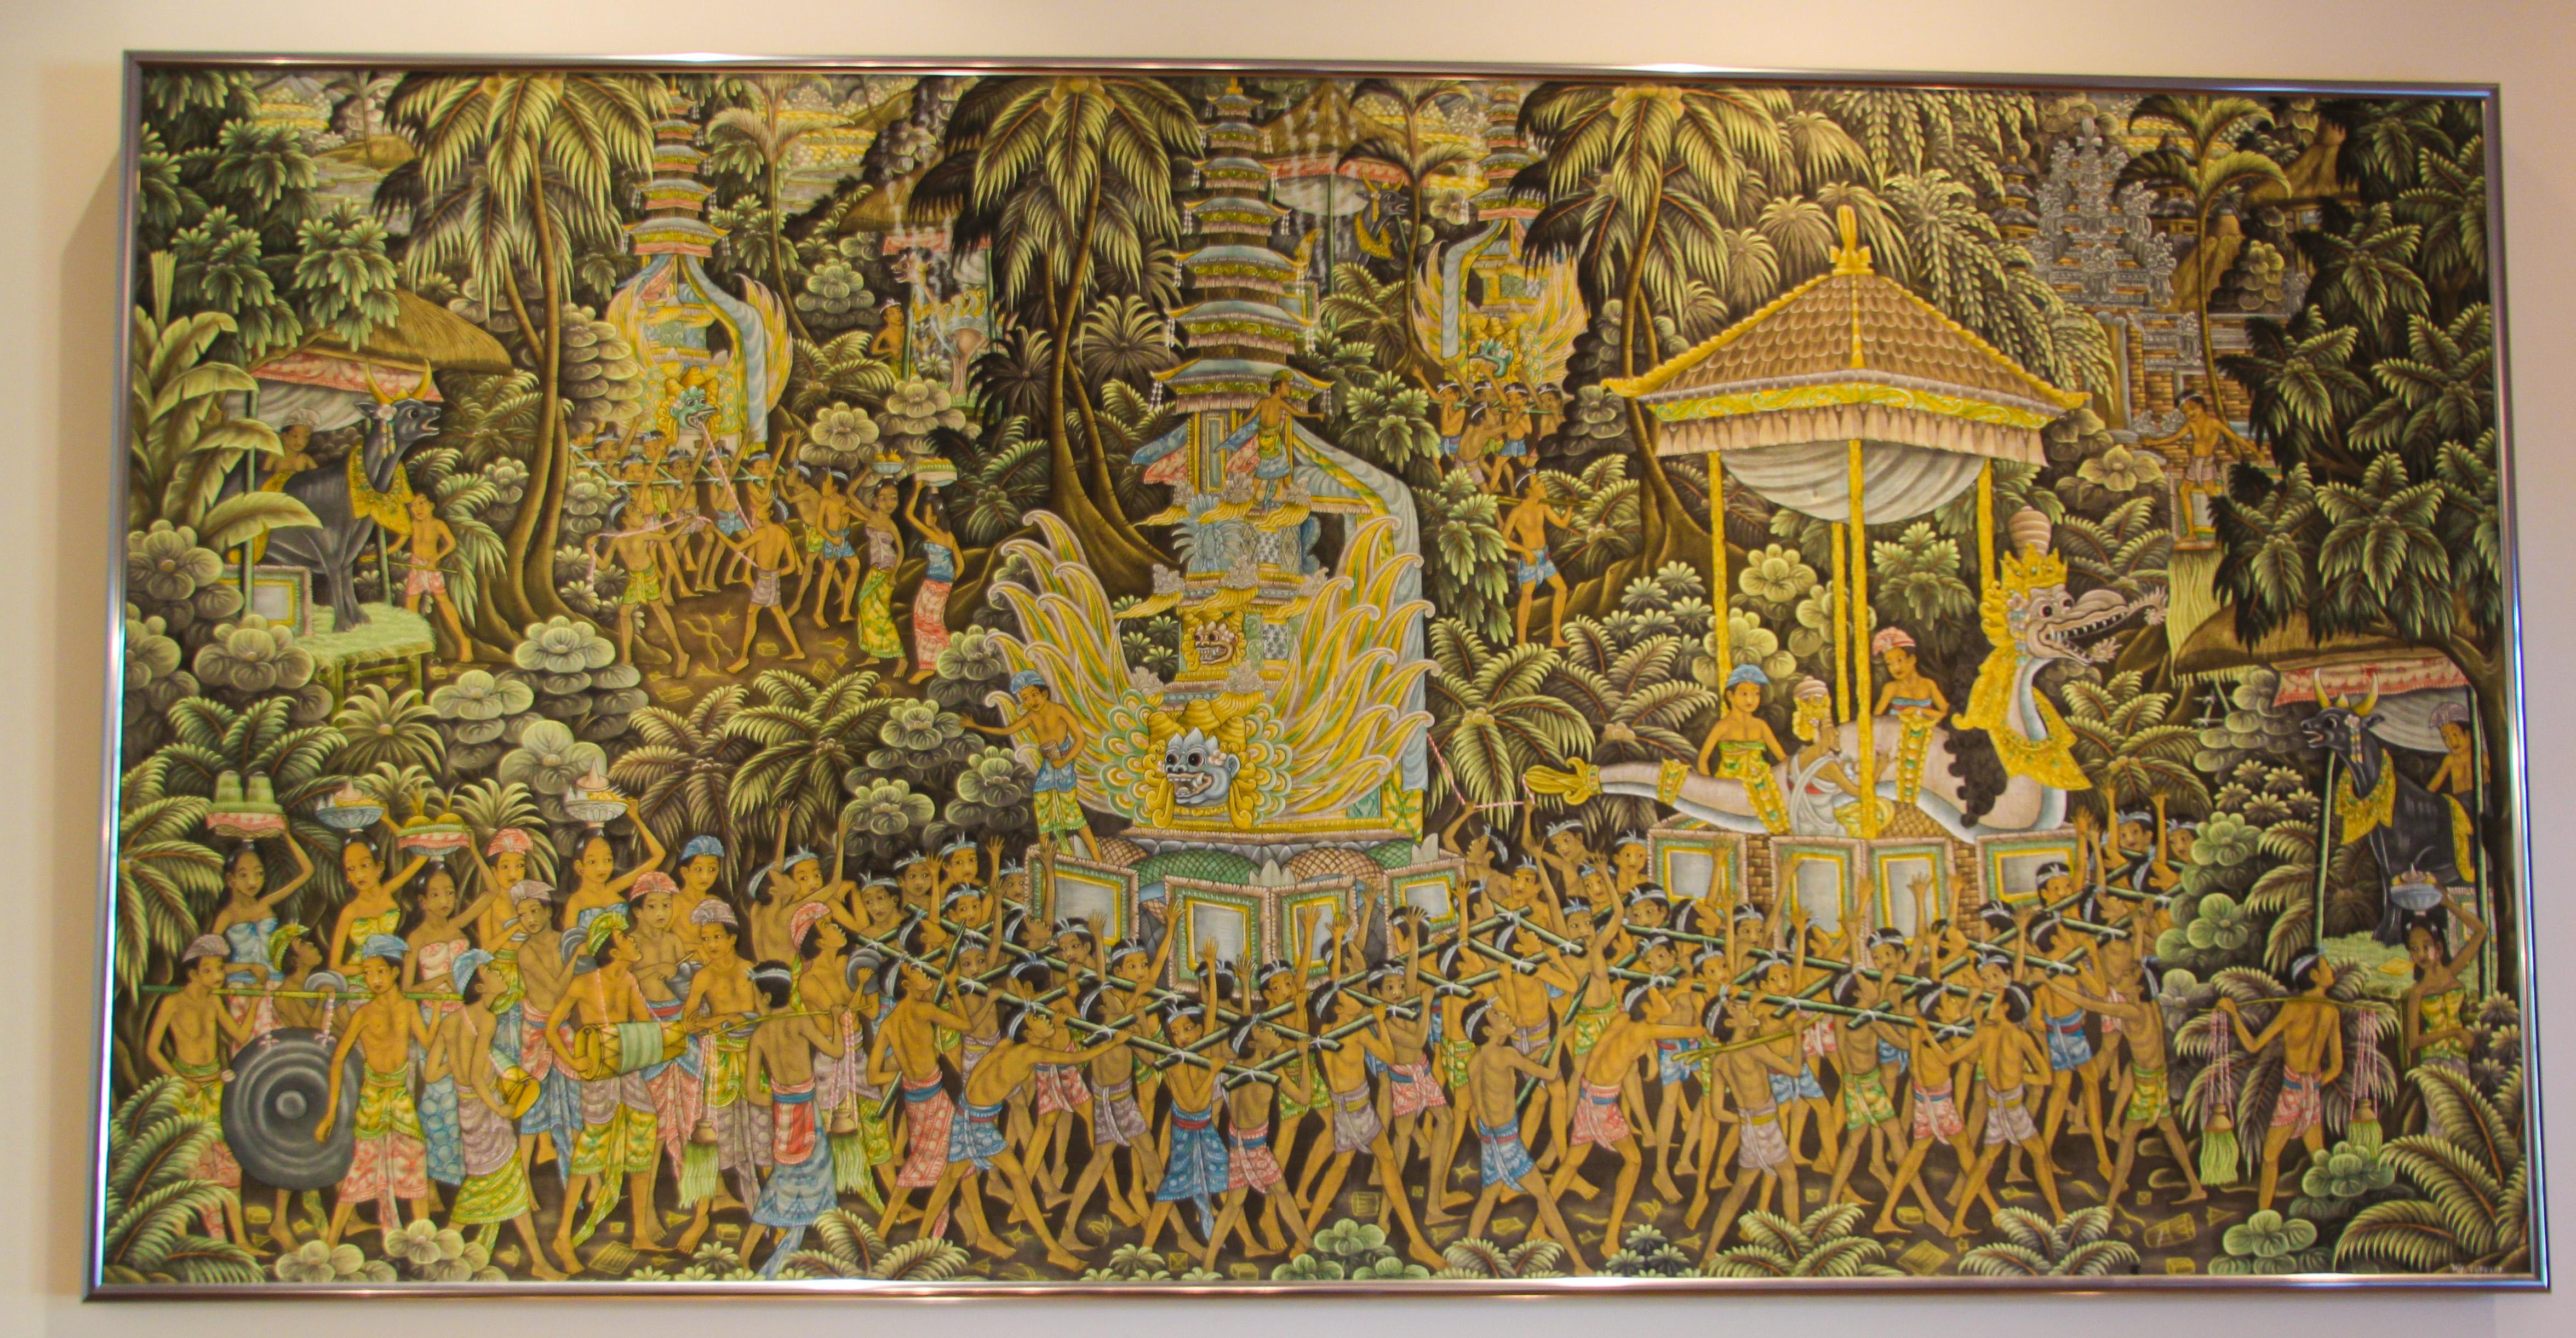 Mid-20th century Balinese painting on silk fabric, framed.
Vintage large Balinese art painting, from Ubud, Bali acrylic on silk.
Beautiful artwork by the Indonesian artist from Ubud. 
Painted in Peliatan, Ubud Bali by W. Kurpelir as signed on the